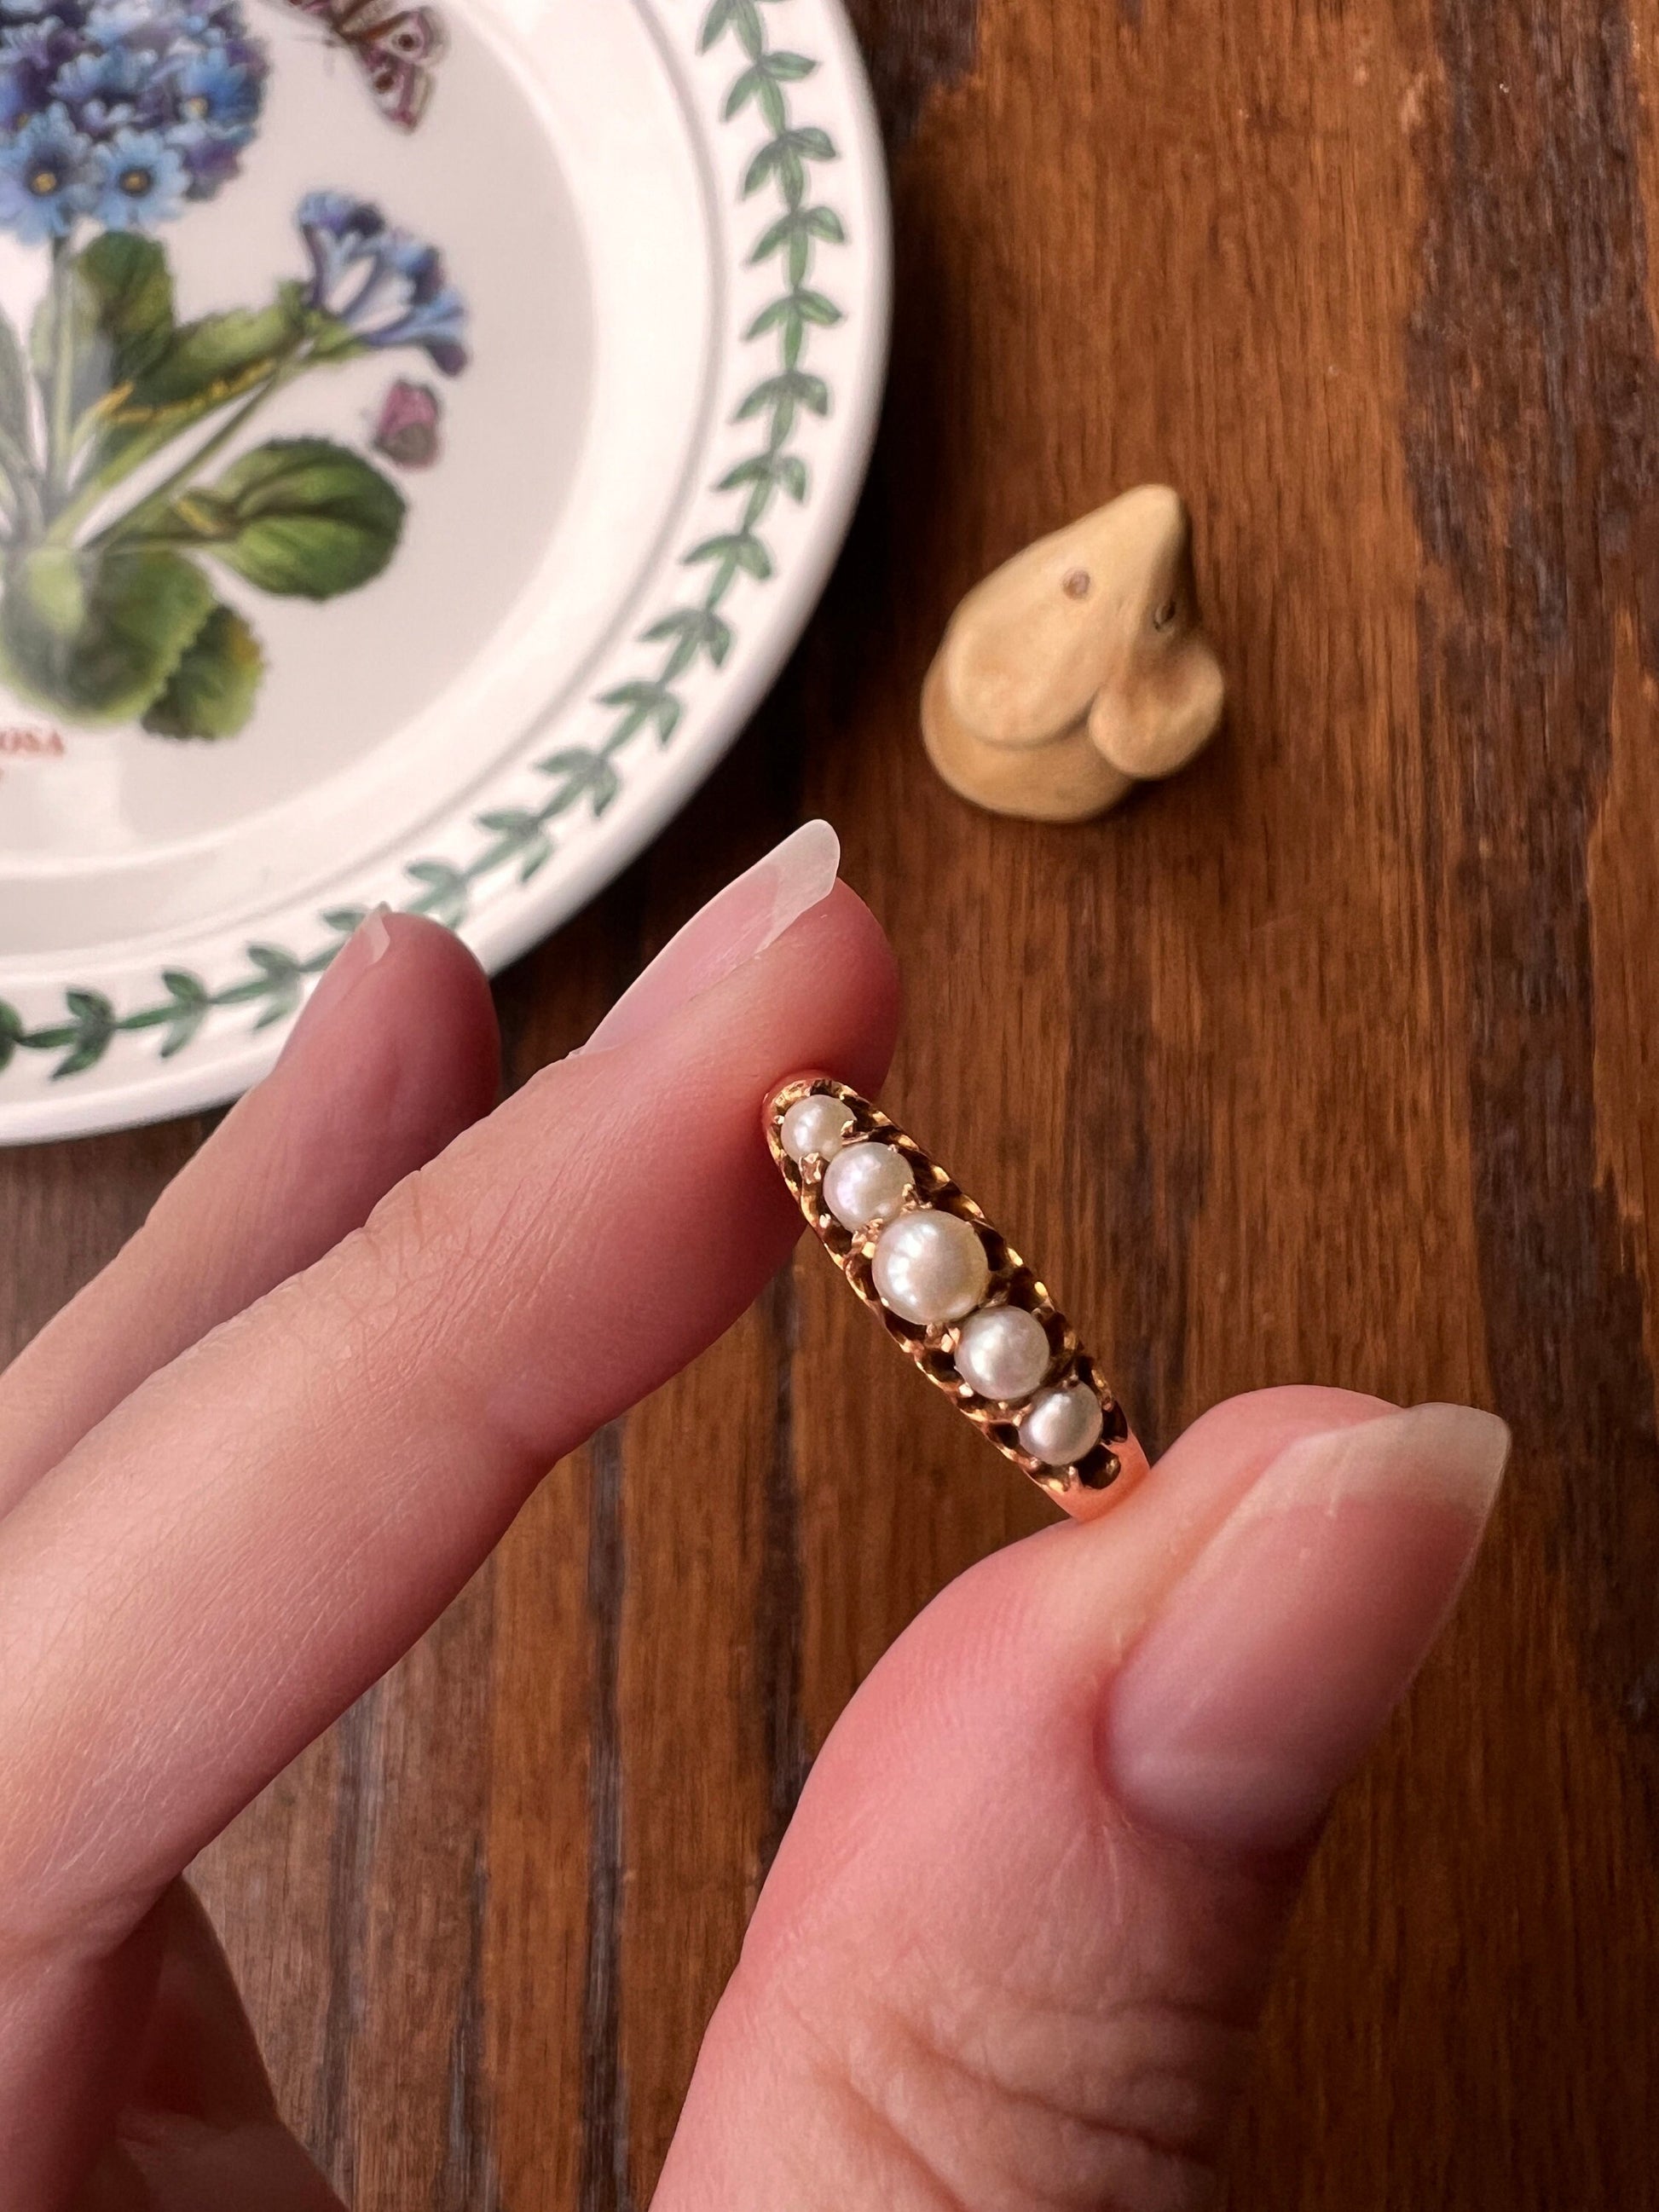 Five Stone PEARL Victorian ANTIQUE Band Ring 15k Gold Row Half Hoop Belcher Stacker Romantic Gift Geometric Not 14k